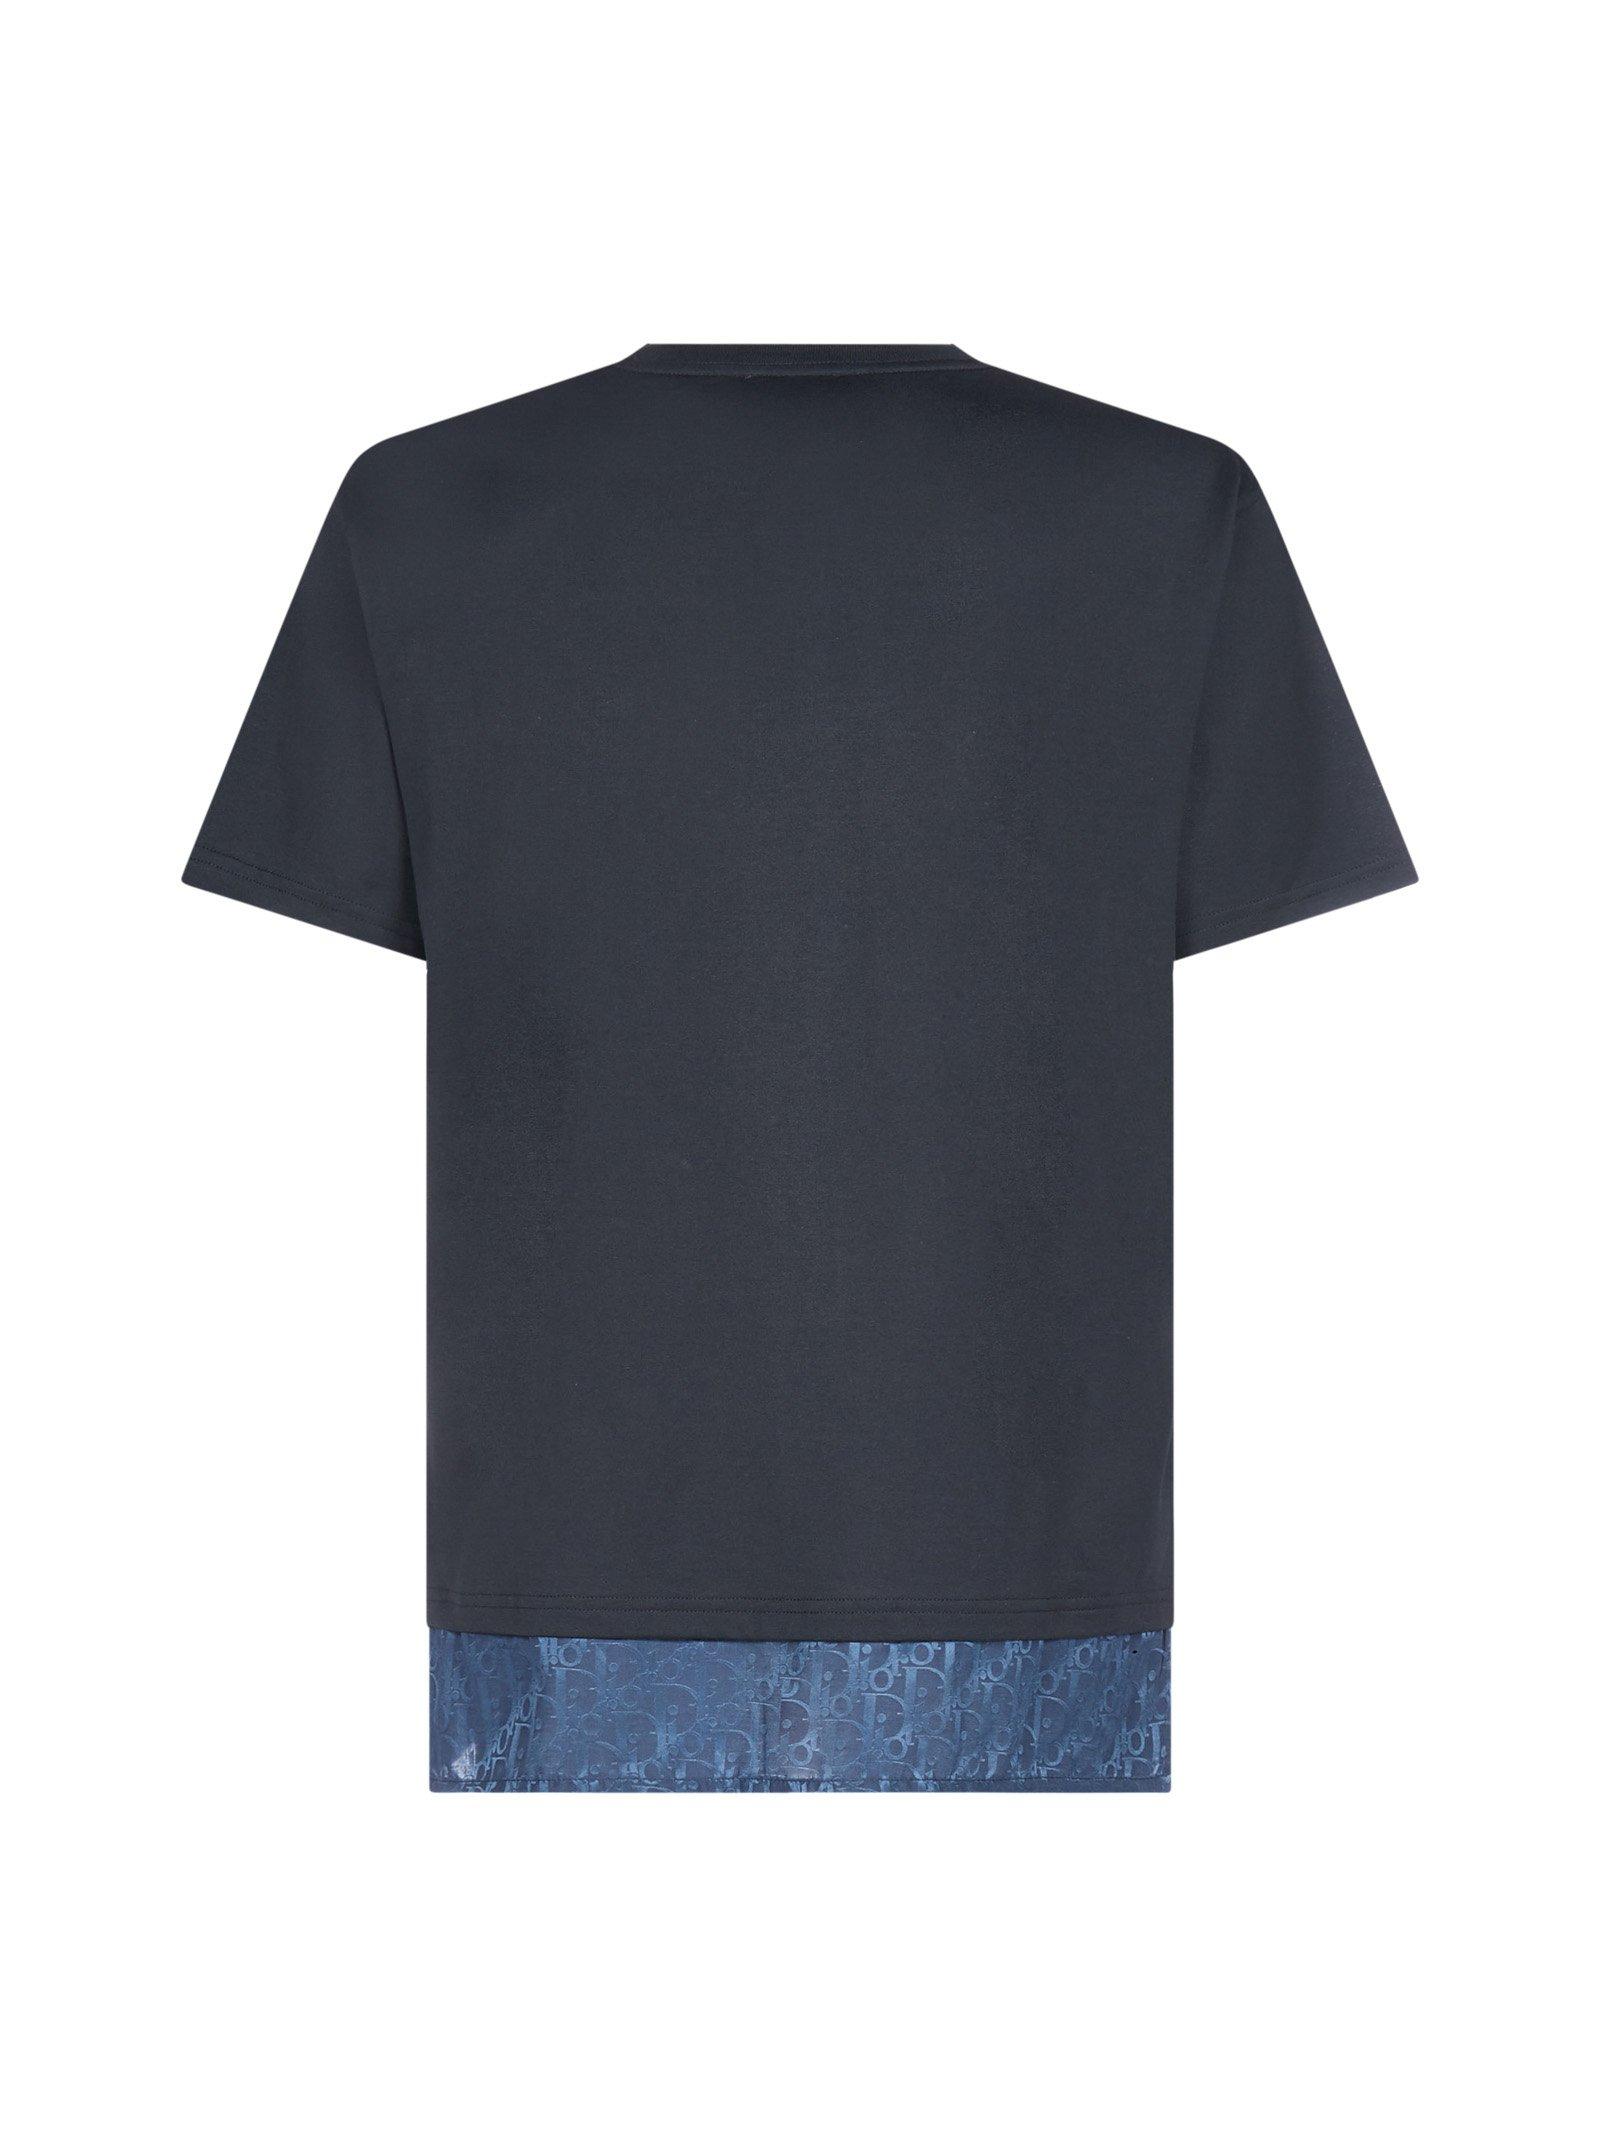 Dior Oblique TShirt Relaxed Fit Blue Terry Cotton Jacquard  DIOR